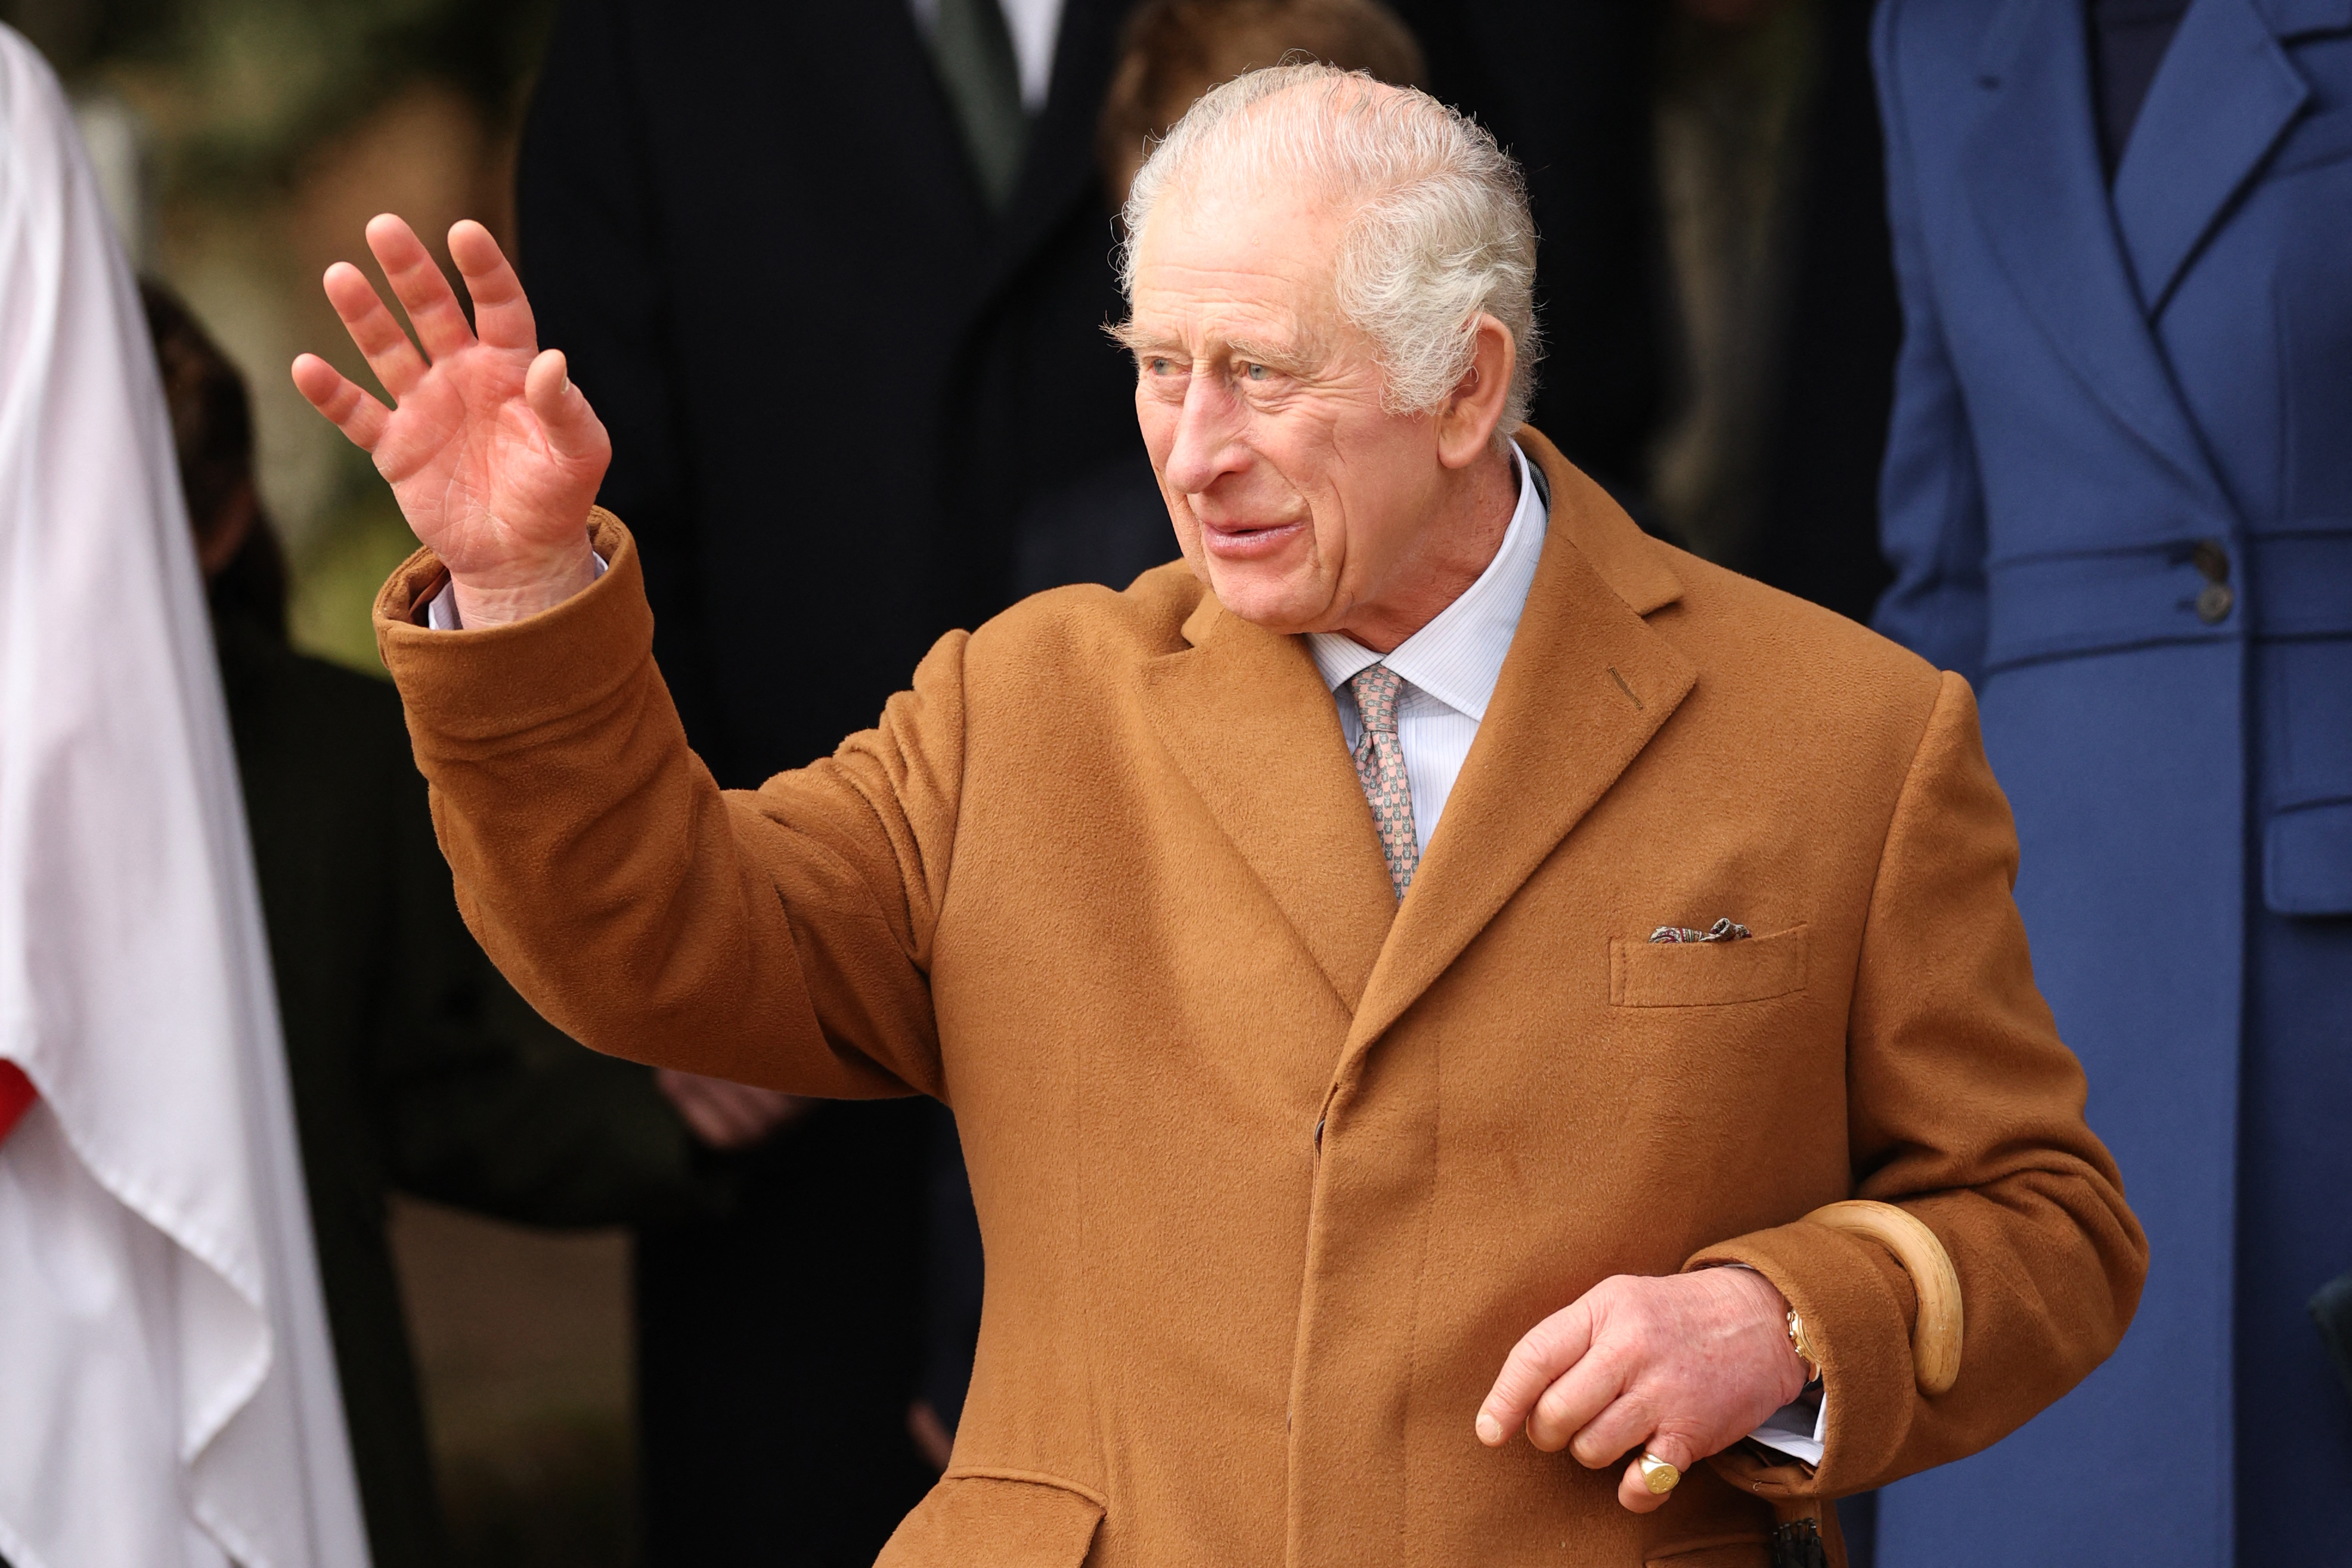 King Charles III waving to well-wishers after attending the Royal Family's traditional Christmas Day service at St Mary Magdalene Church on the Sandringham Estate in eastern England, on December 25, 2023 | Source: Getty Images